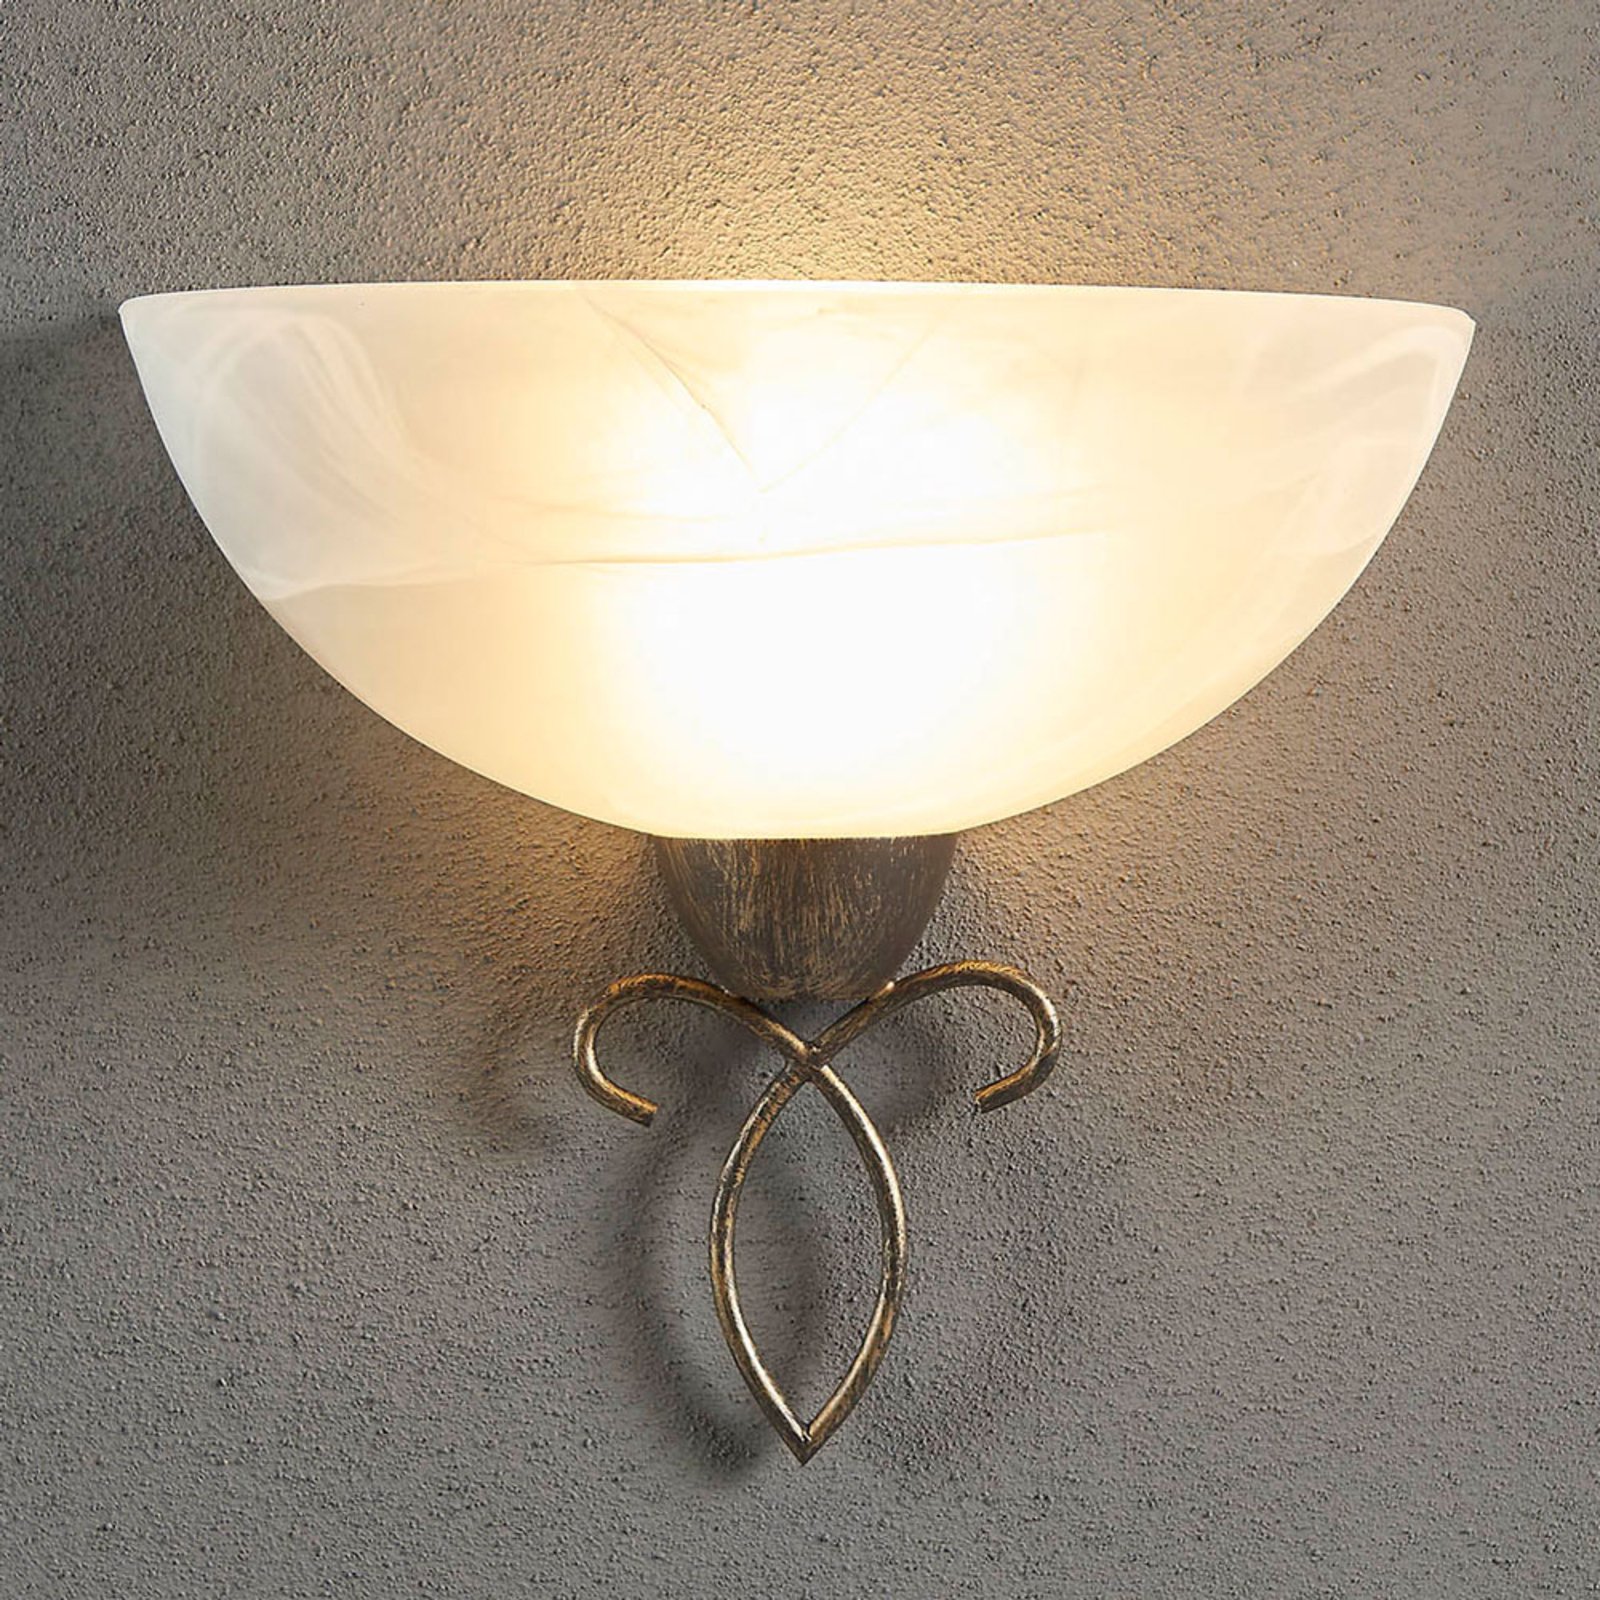 Wall light Mohija with a romantic look